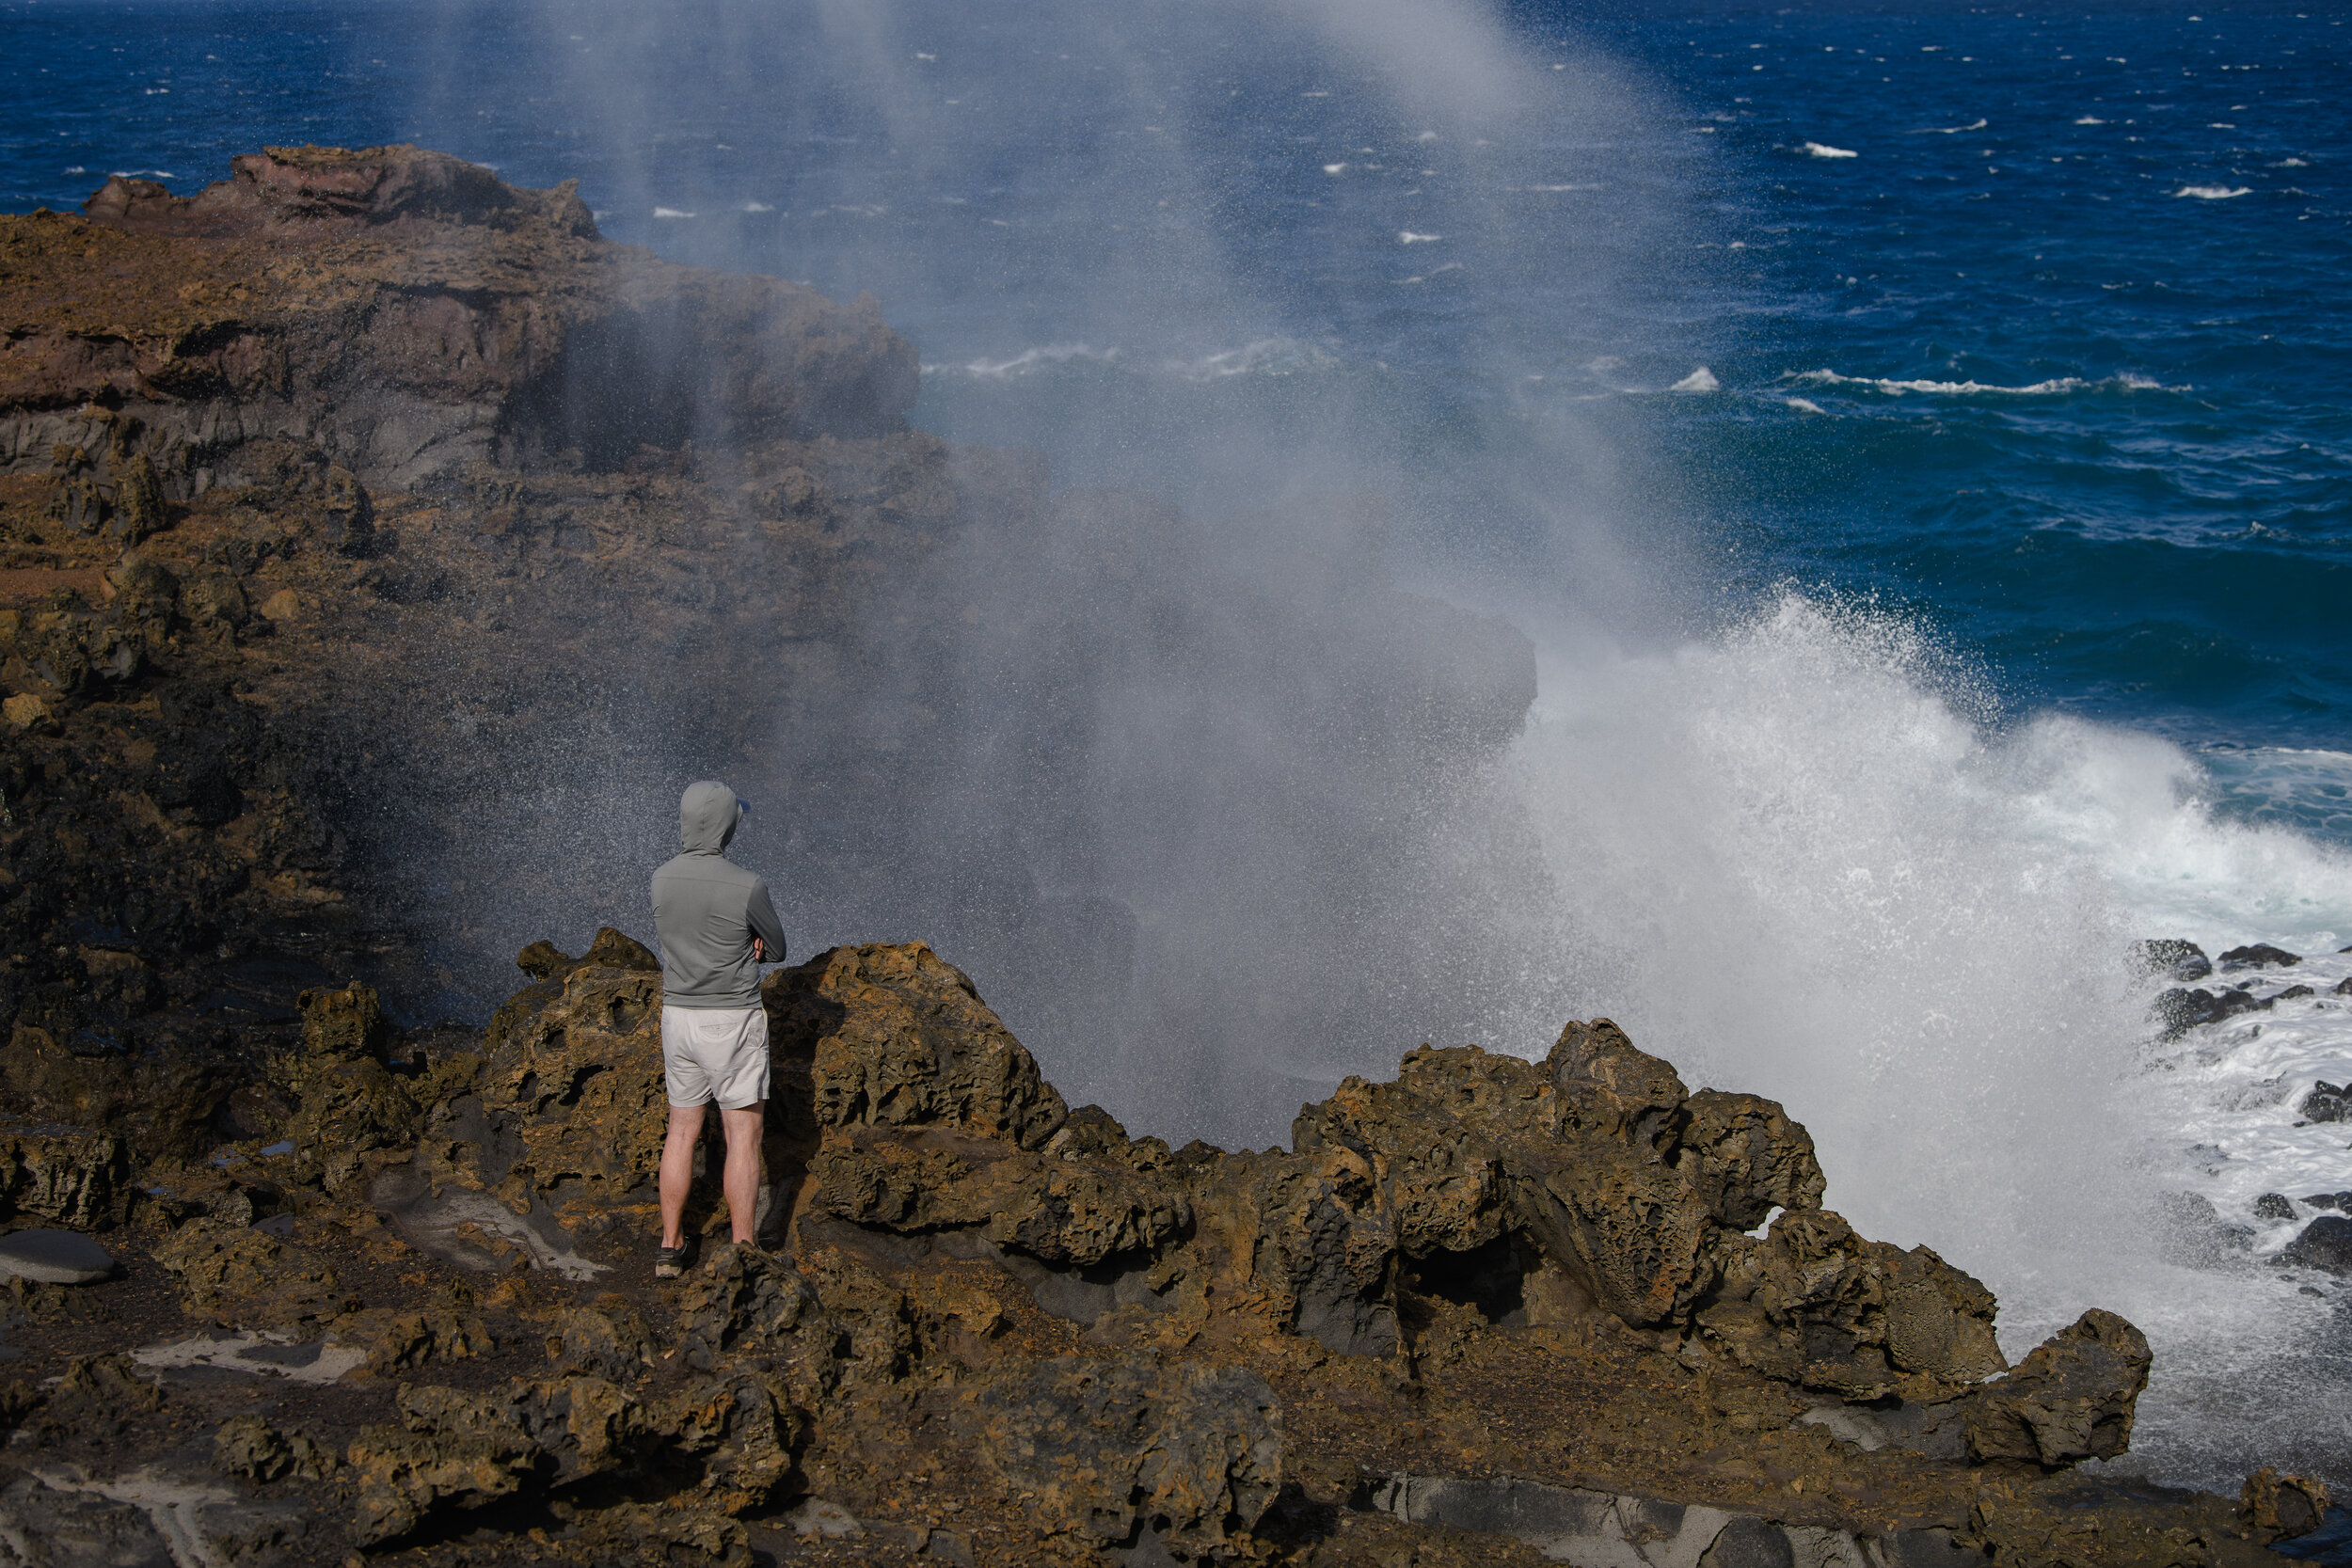 Neil In Front of A Blowhole, 2021